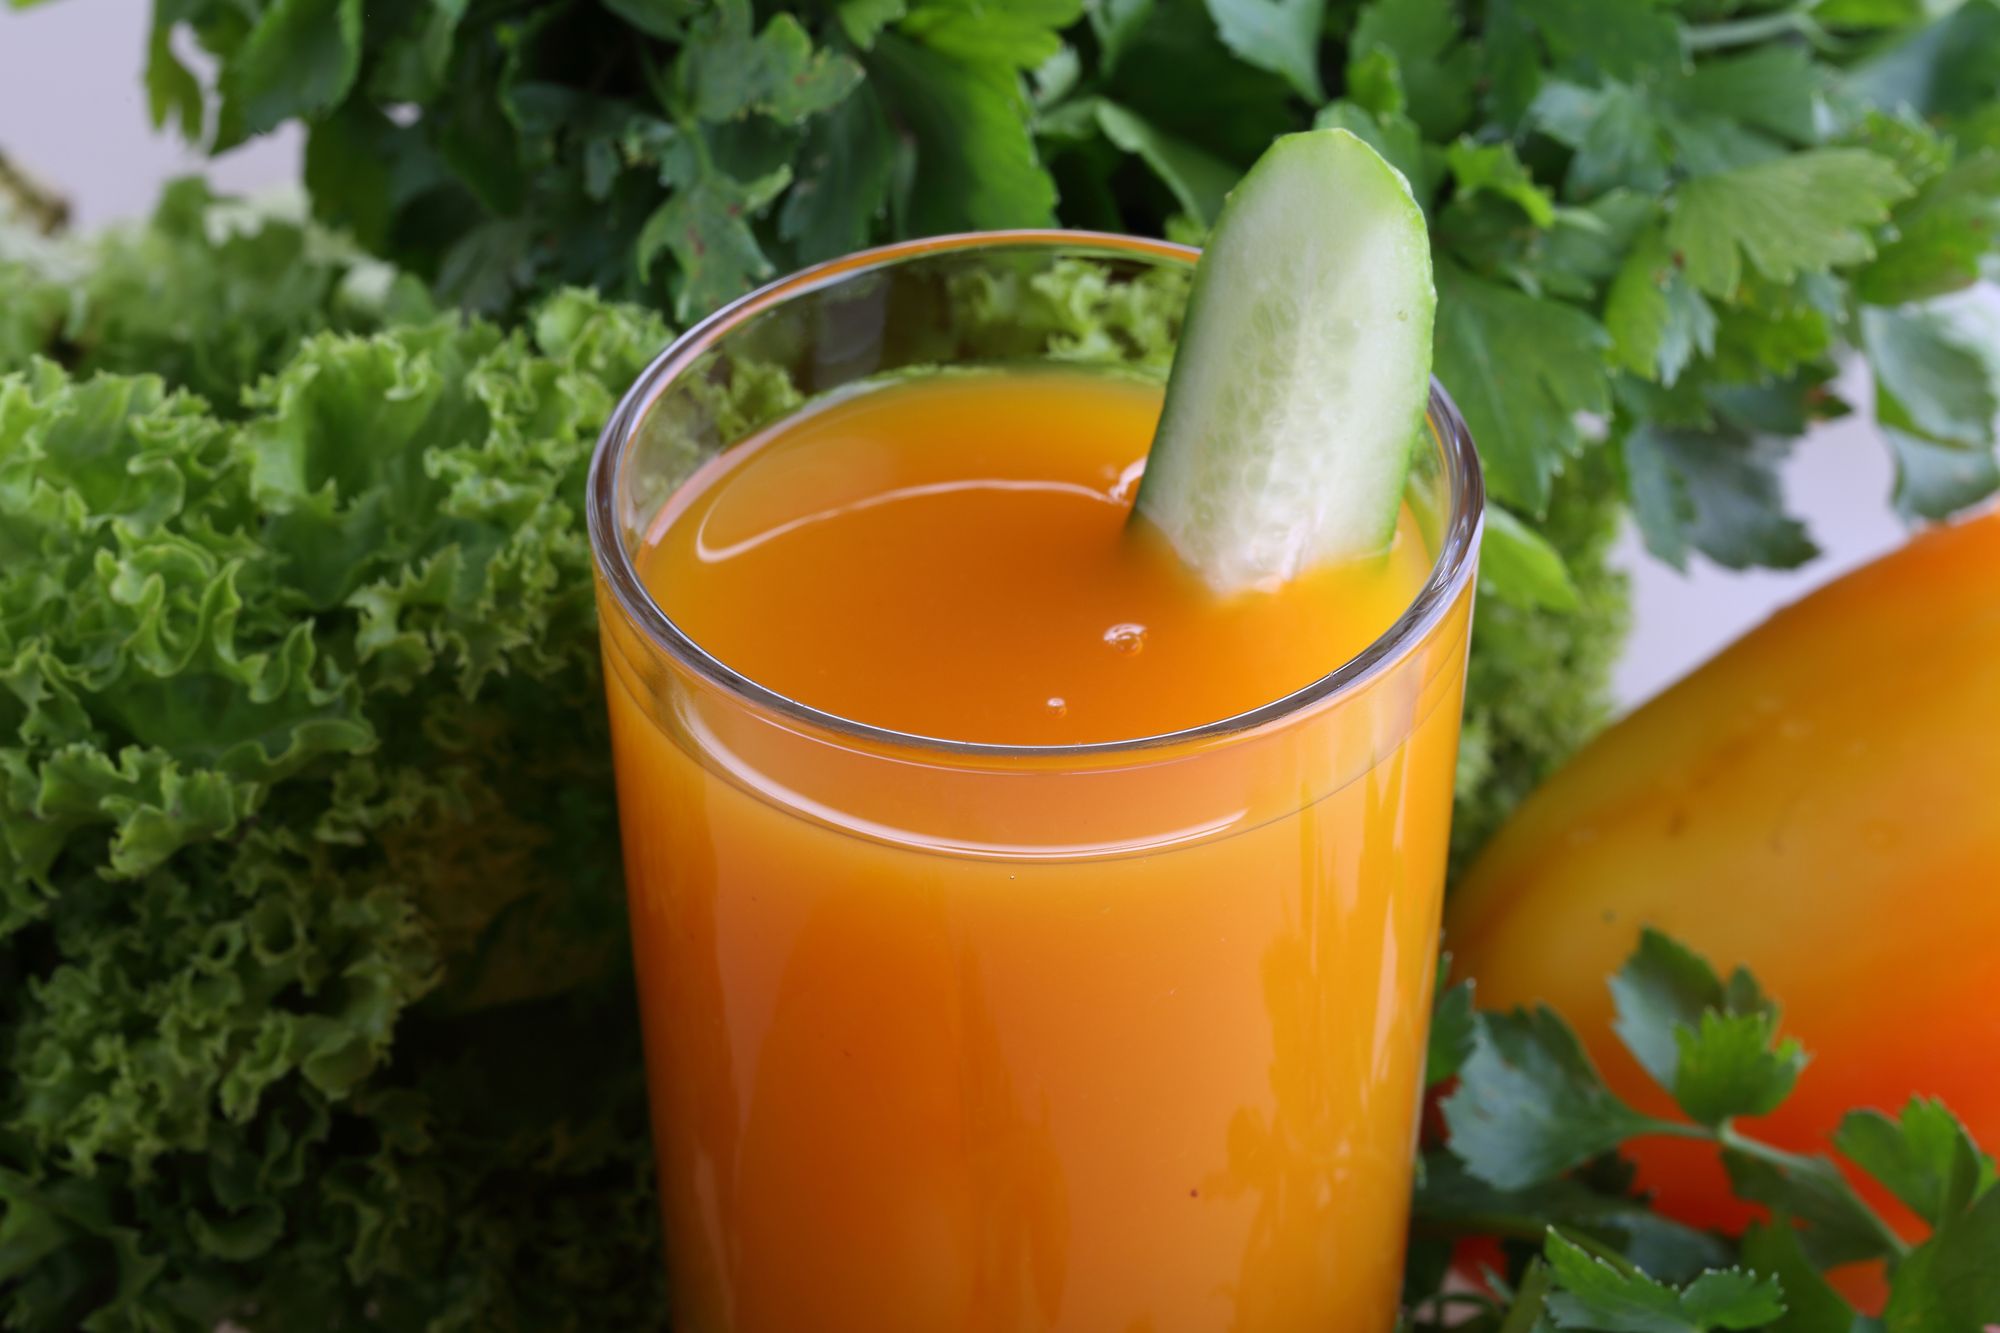 Cucumber Carrot Smoothie by MAR007 | www.shutterstock.com